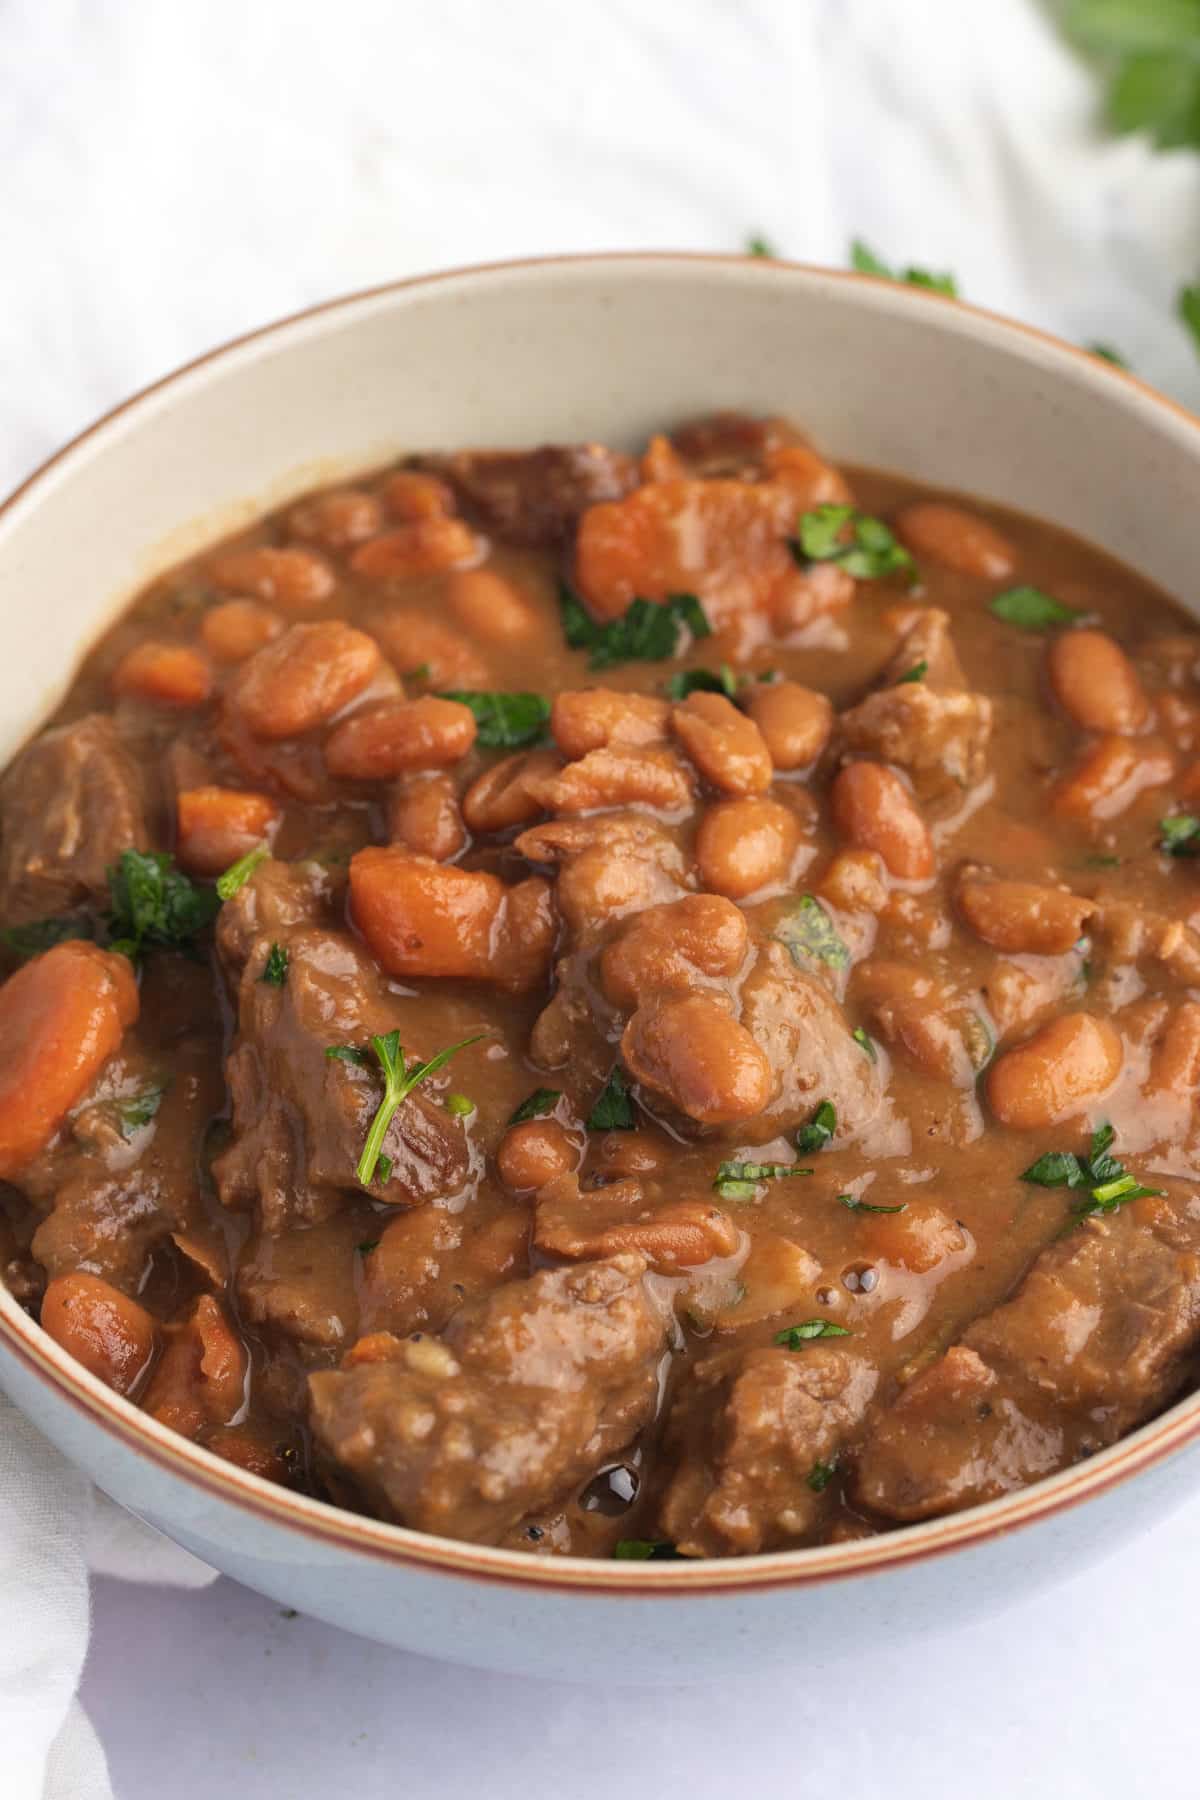 Beef and bean stew served in a white bowl.